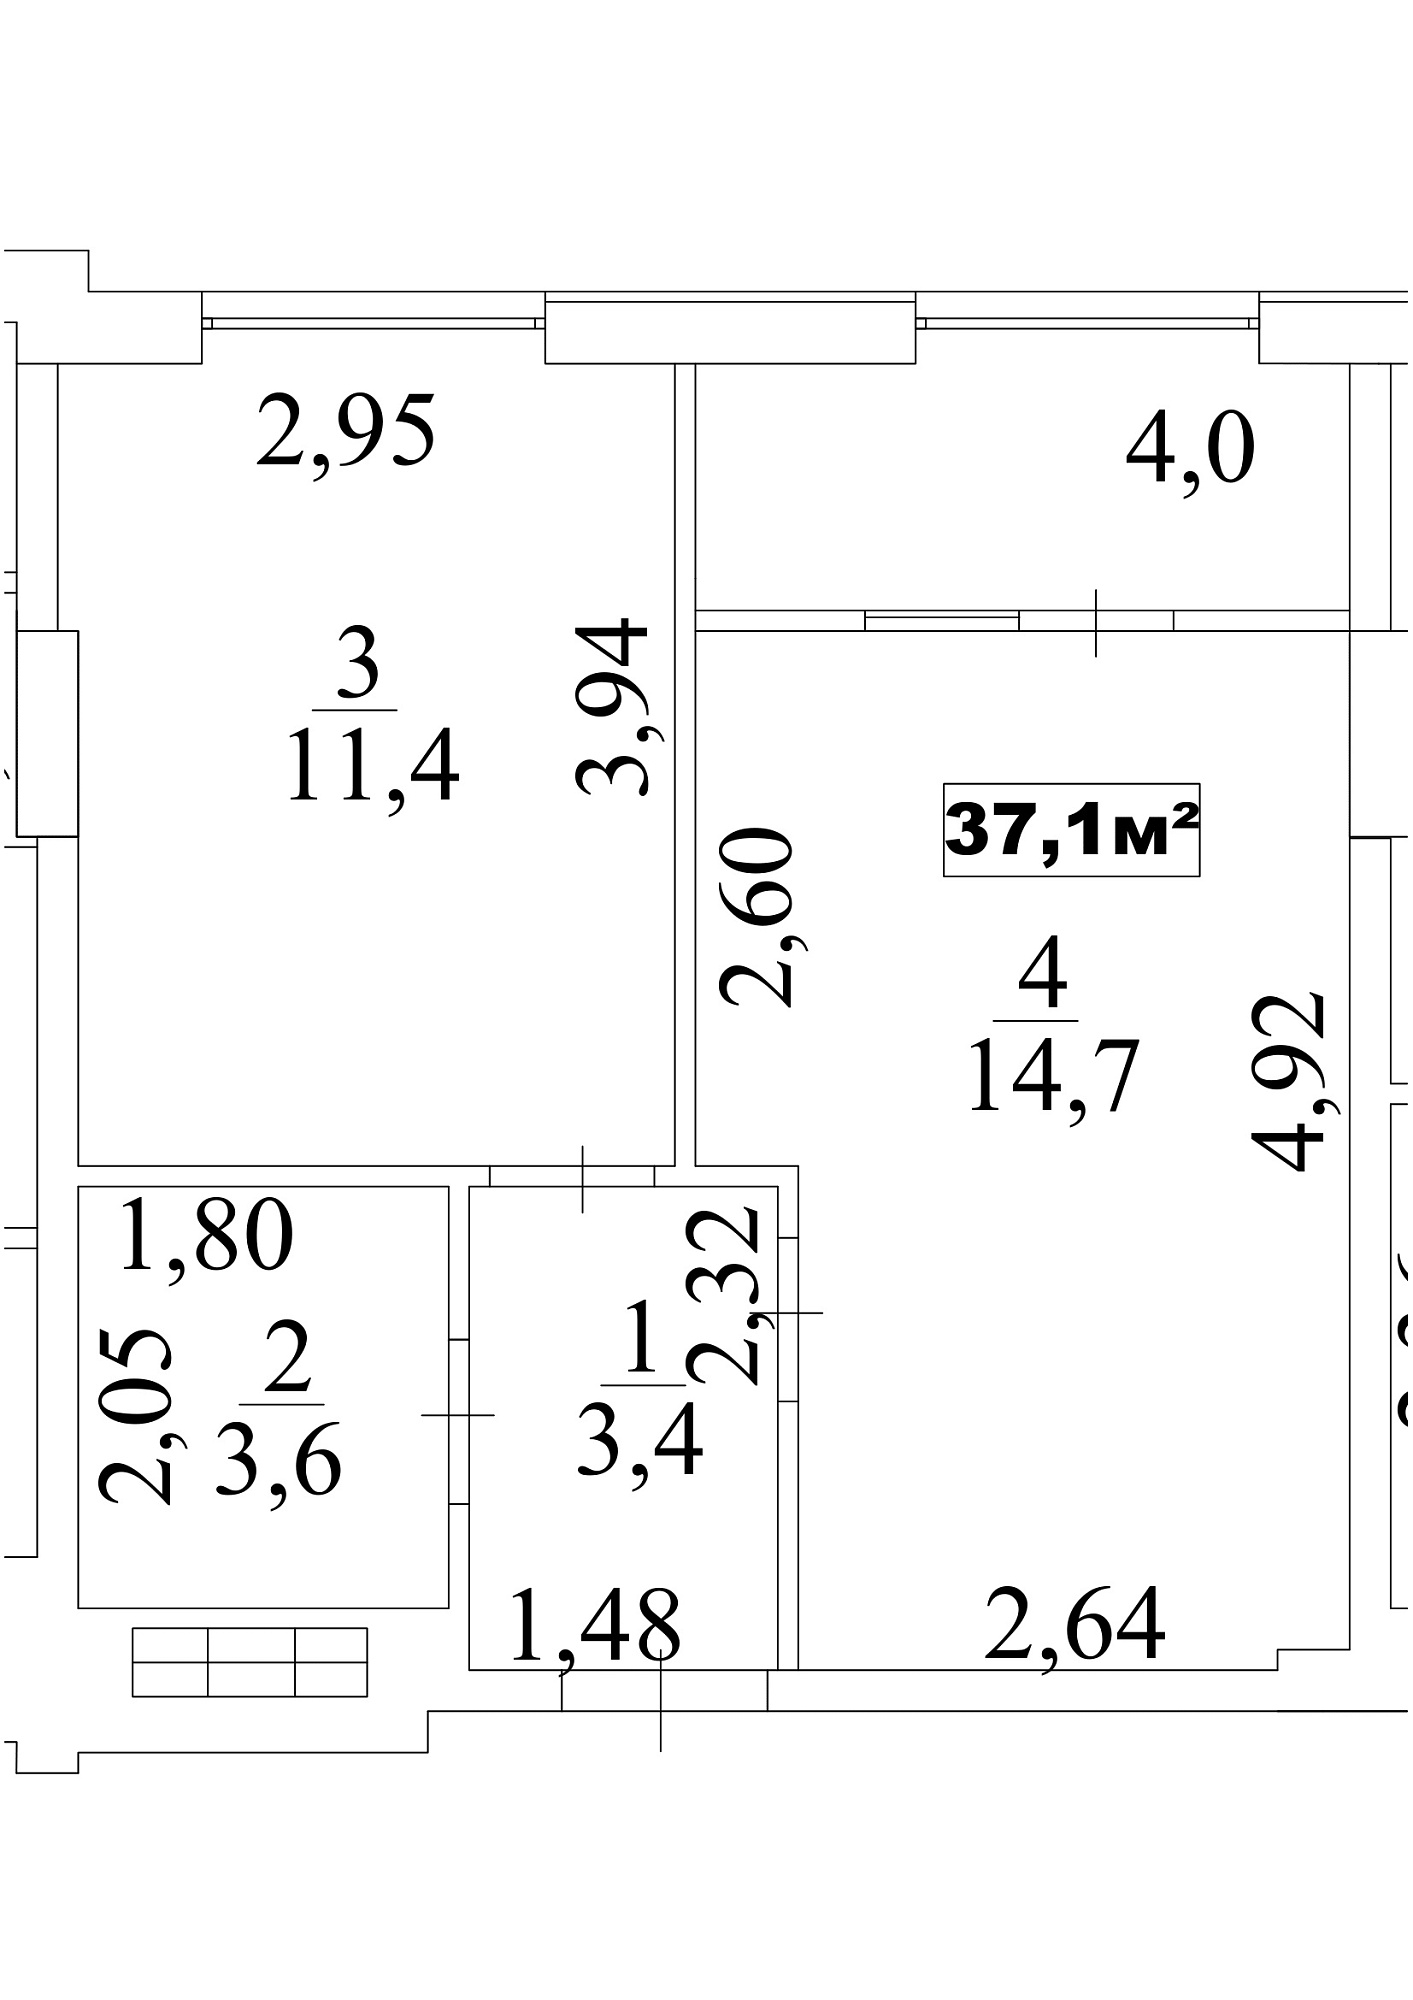 Planning 1-rm flats area 37.1m2, AB-10-06/00051.